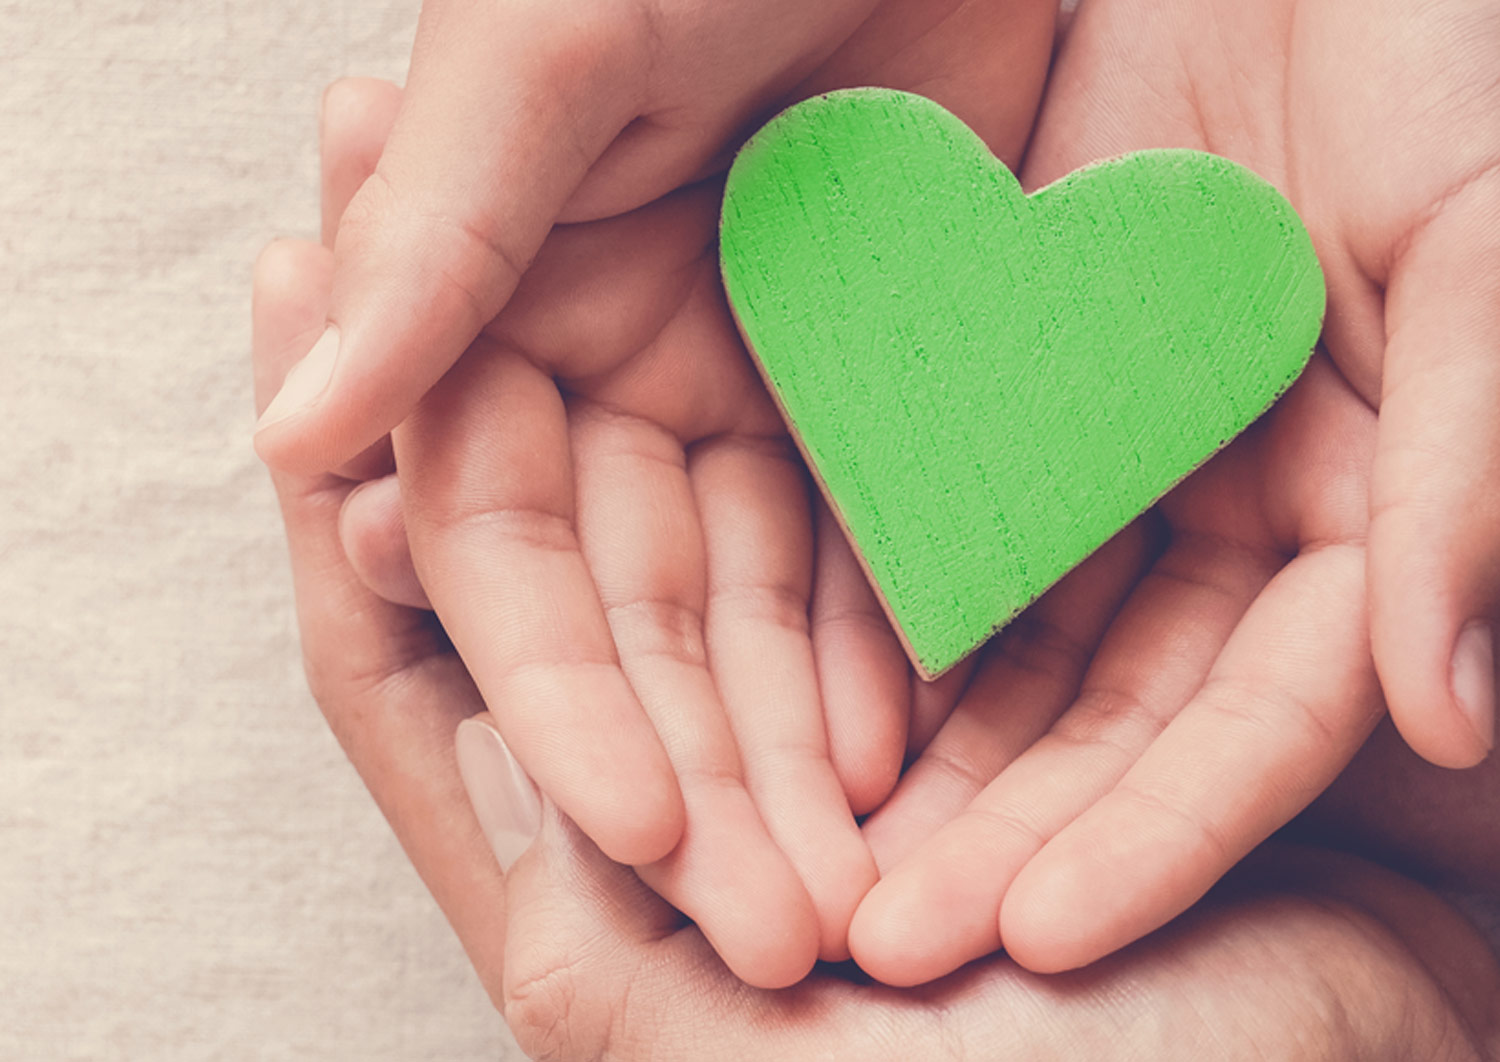 child and adult hands together, holding a green heart